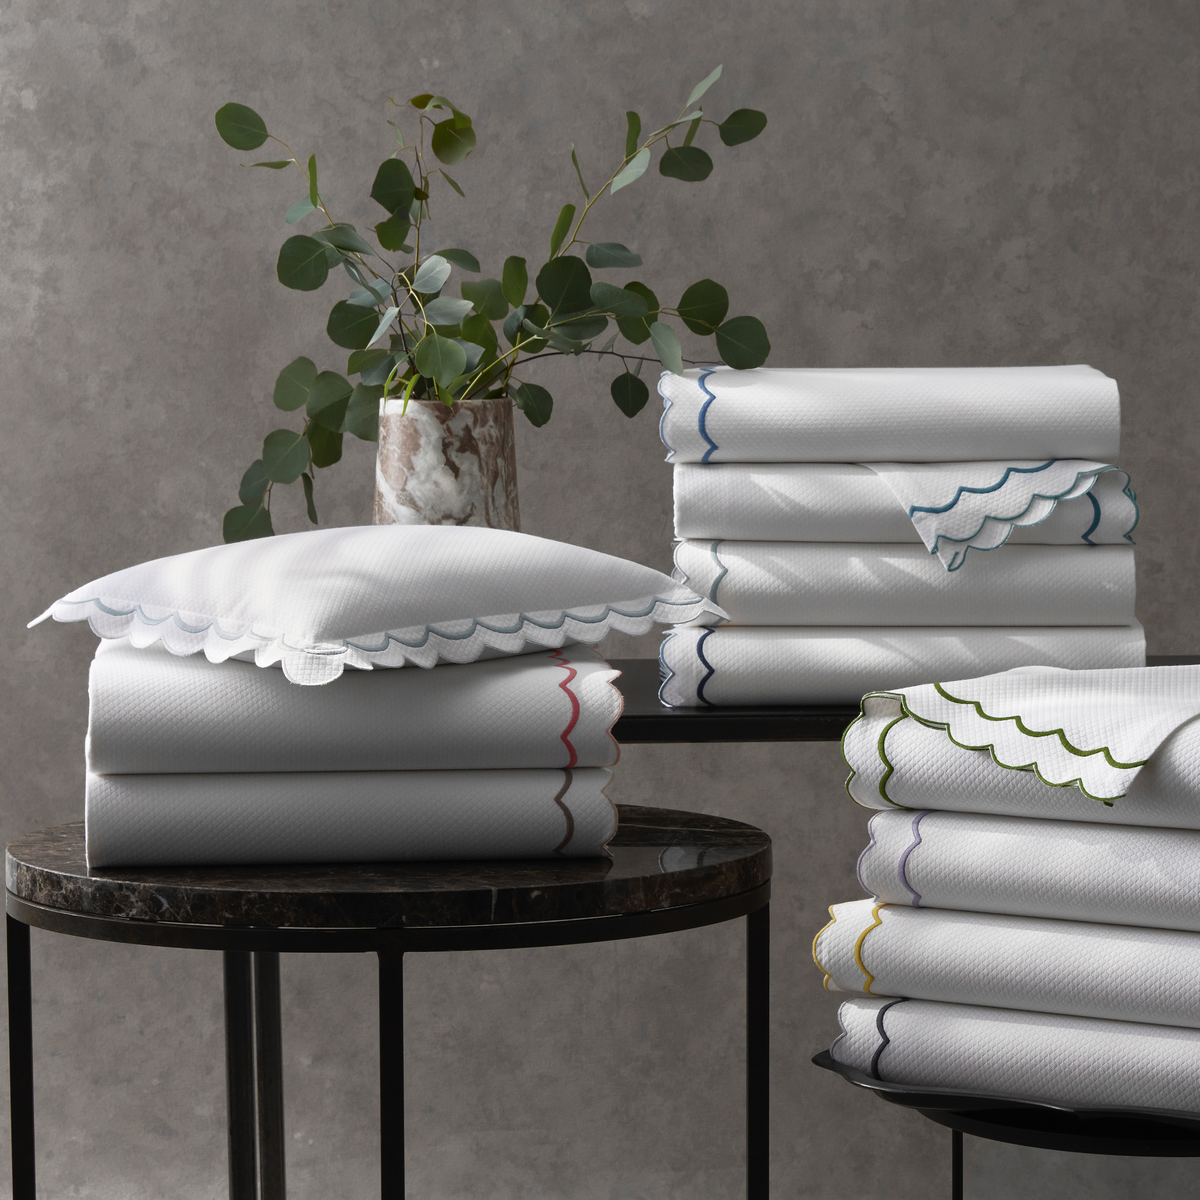 Stacks of All Colors of Folded Matouk India Pique Bedding